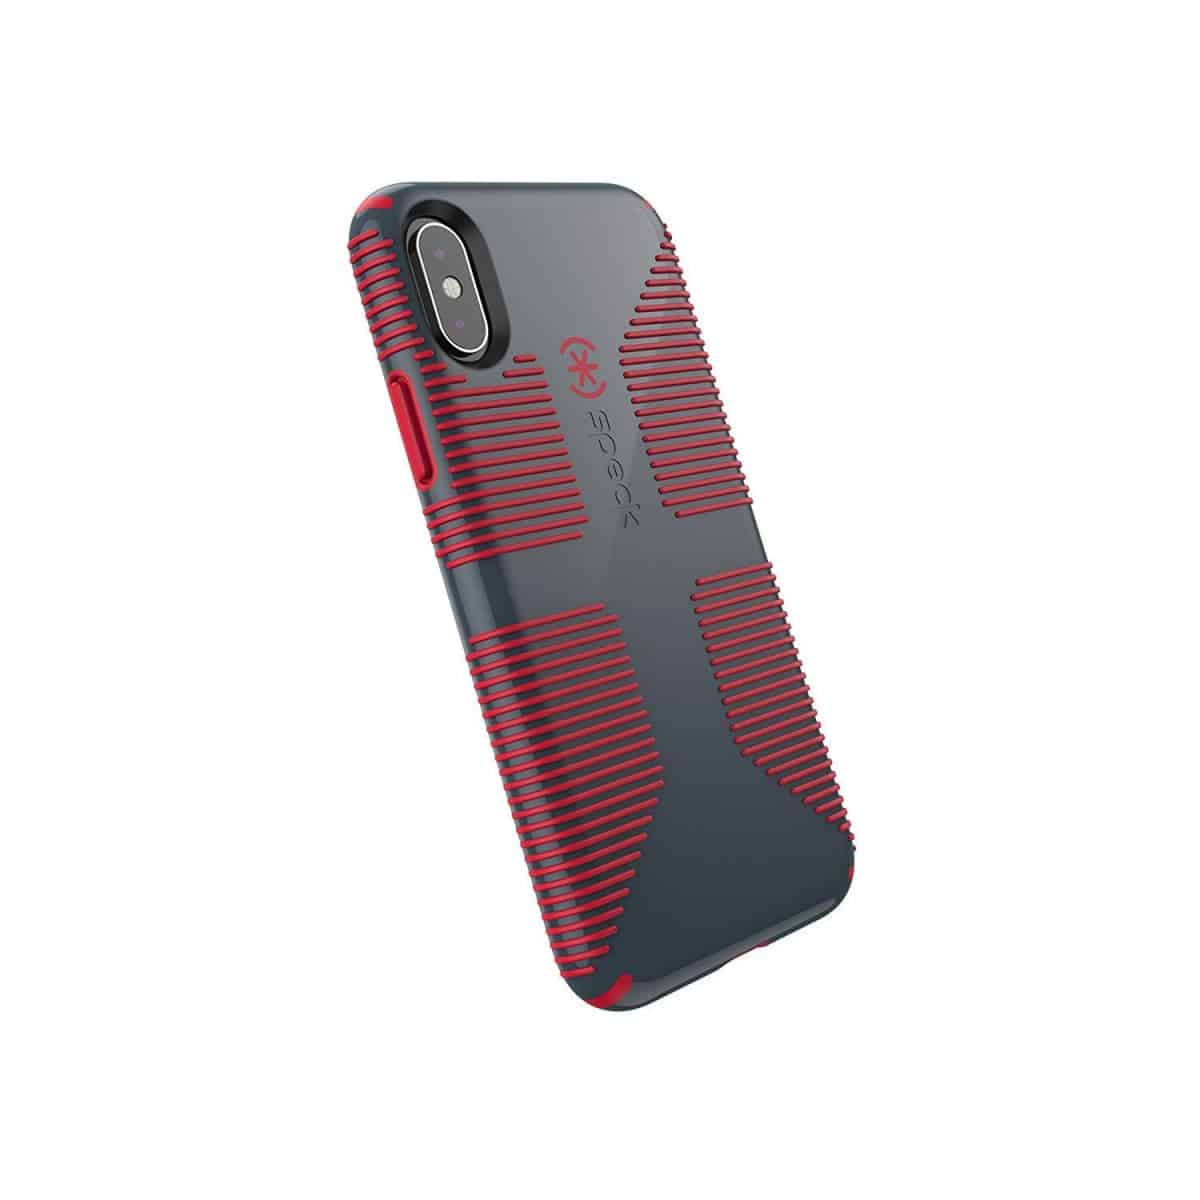 Speck Candyshell Grip iPhone X Case